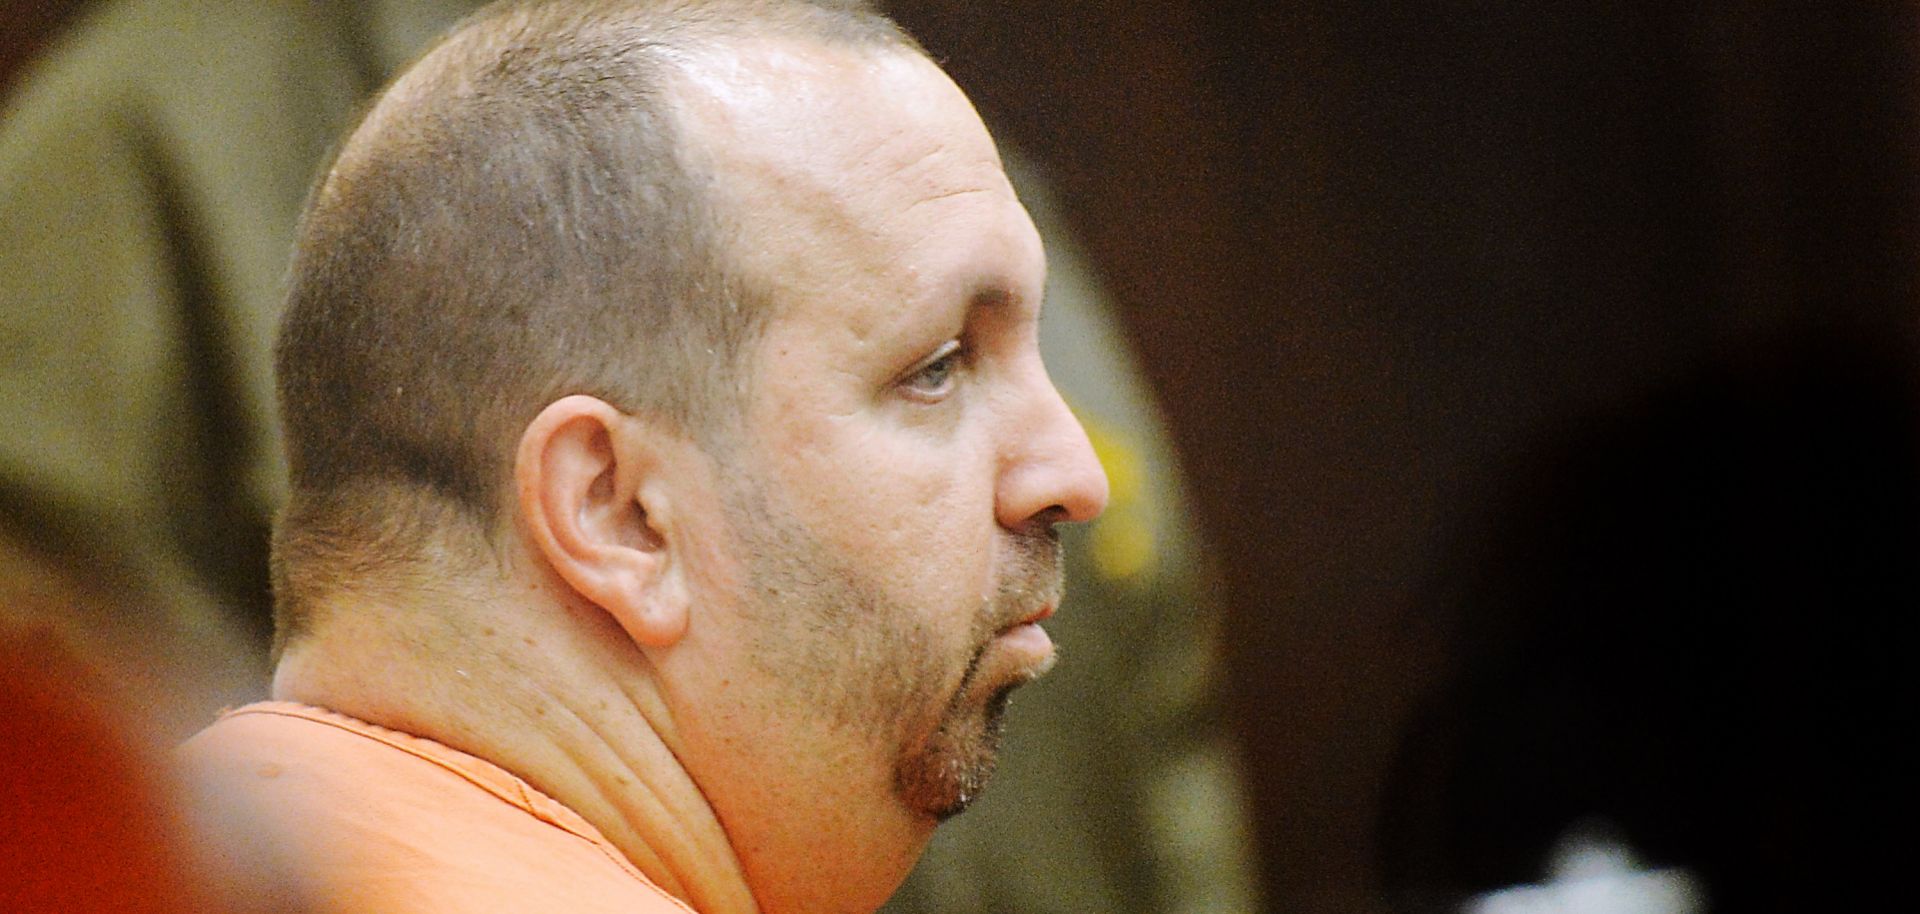 Craig Stephen Hicks is shown here in court on Feb. 11, 2015, the day after authorities say he fatally shot three Muslim college students in Chapel Hill, North Carolina.